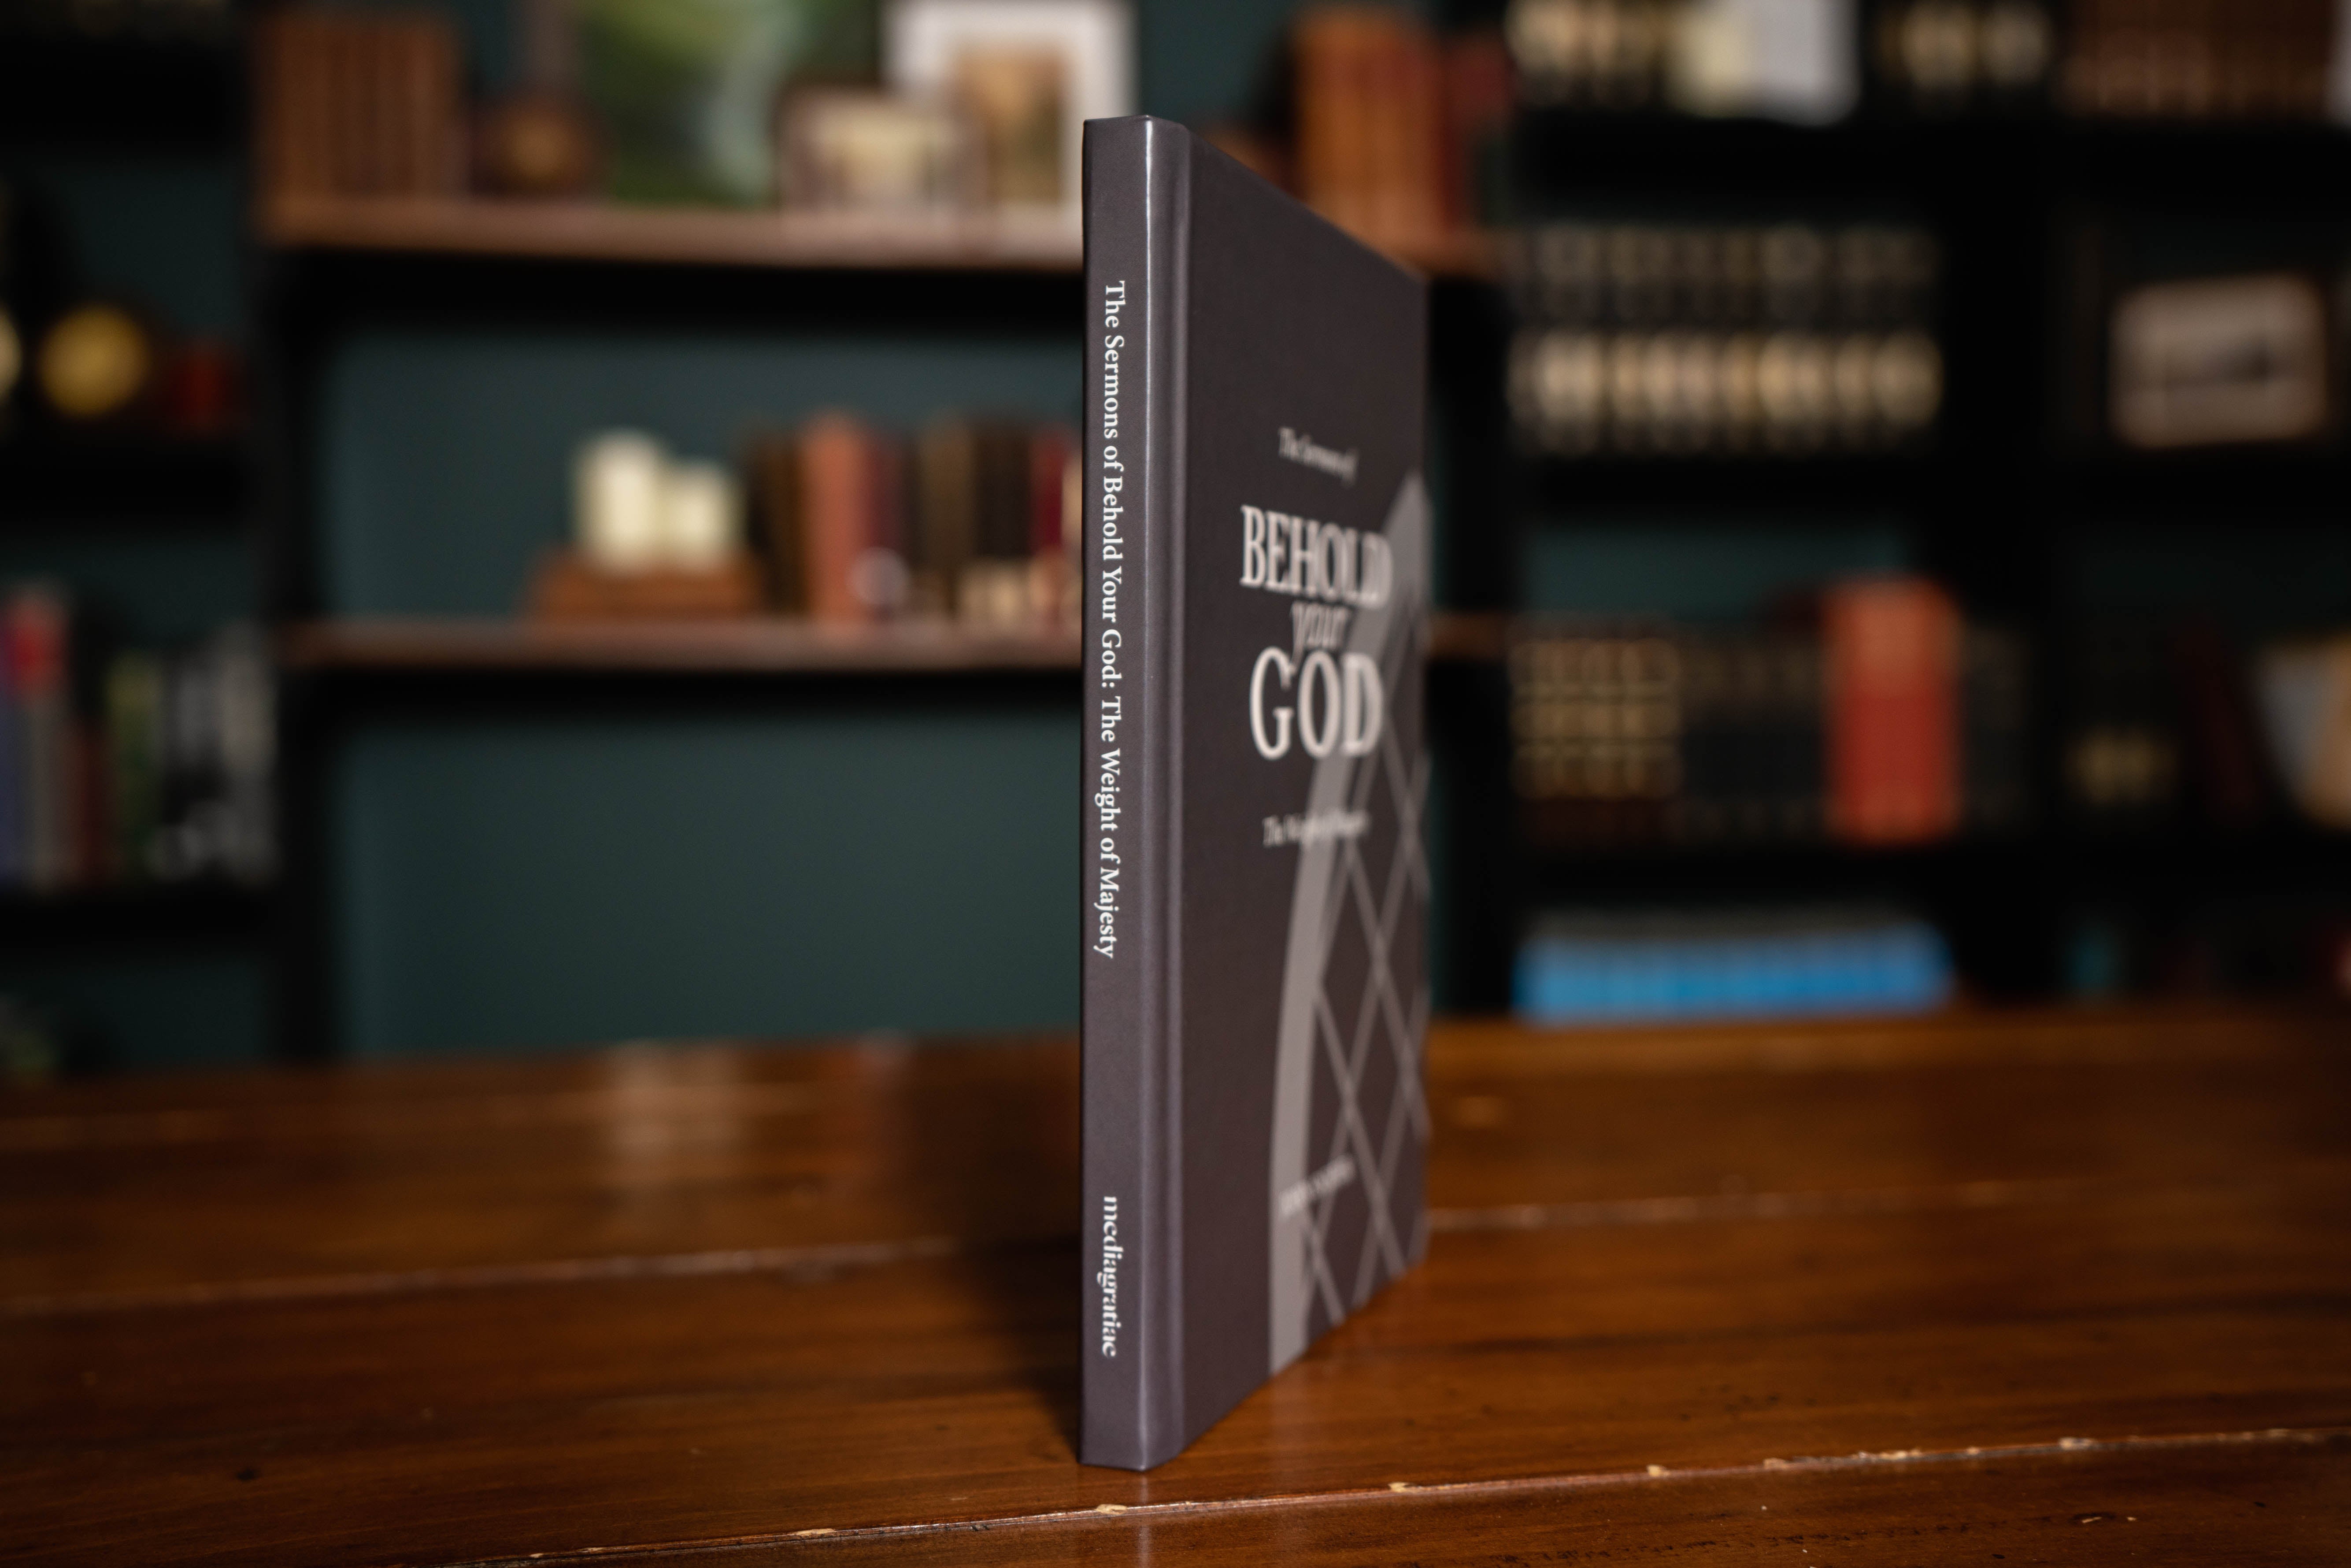 The Sermons of Behold Your God: The Weight of Majesty Book